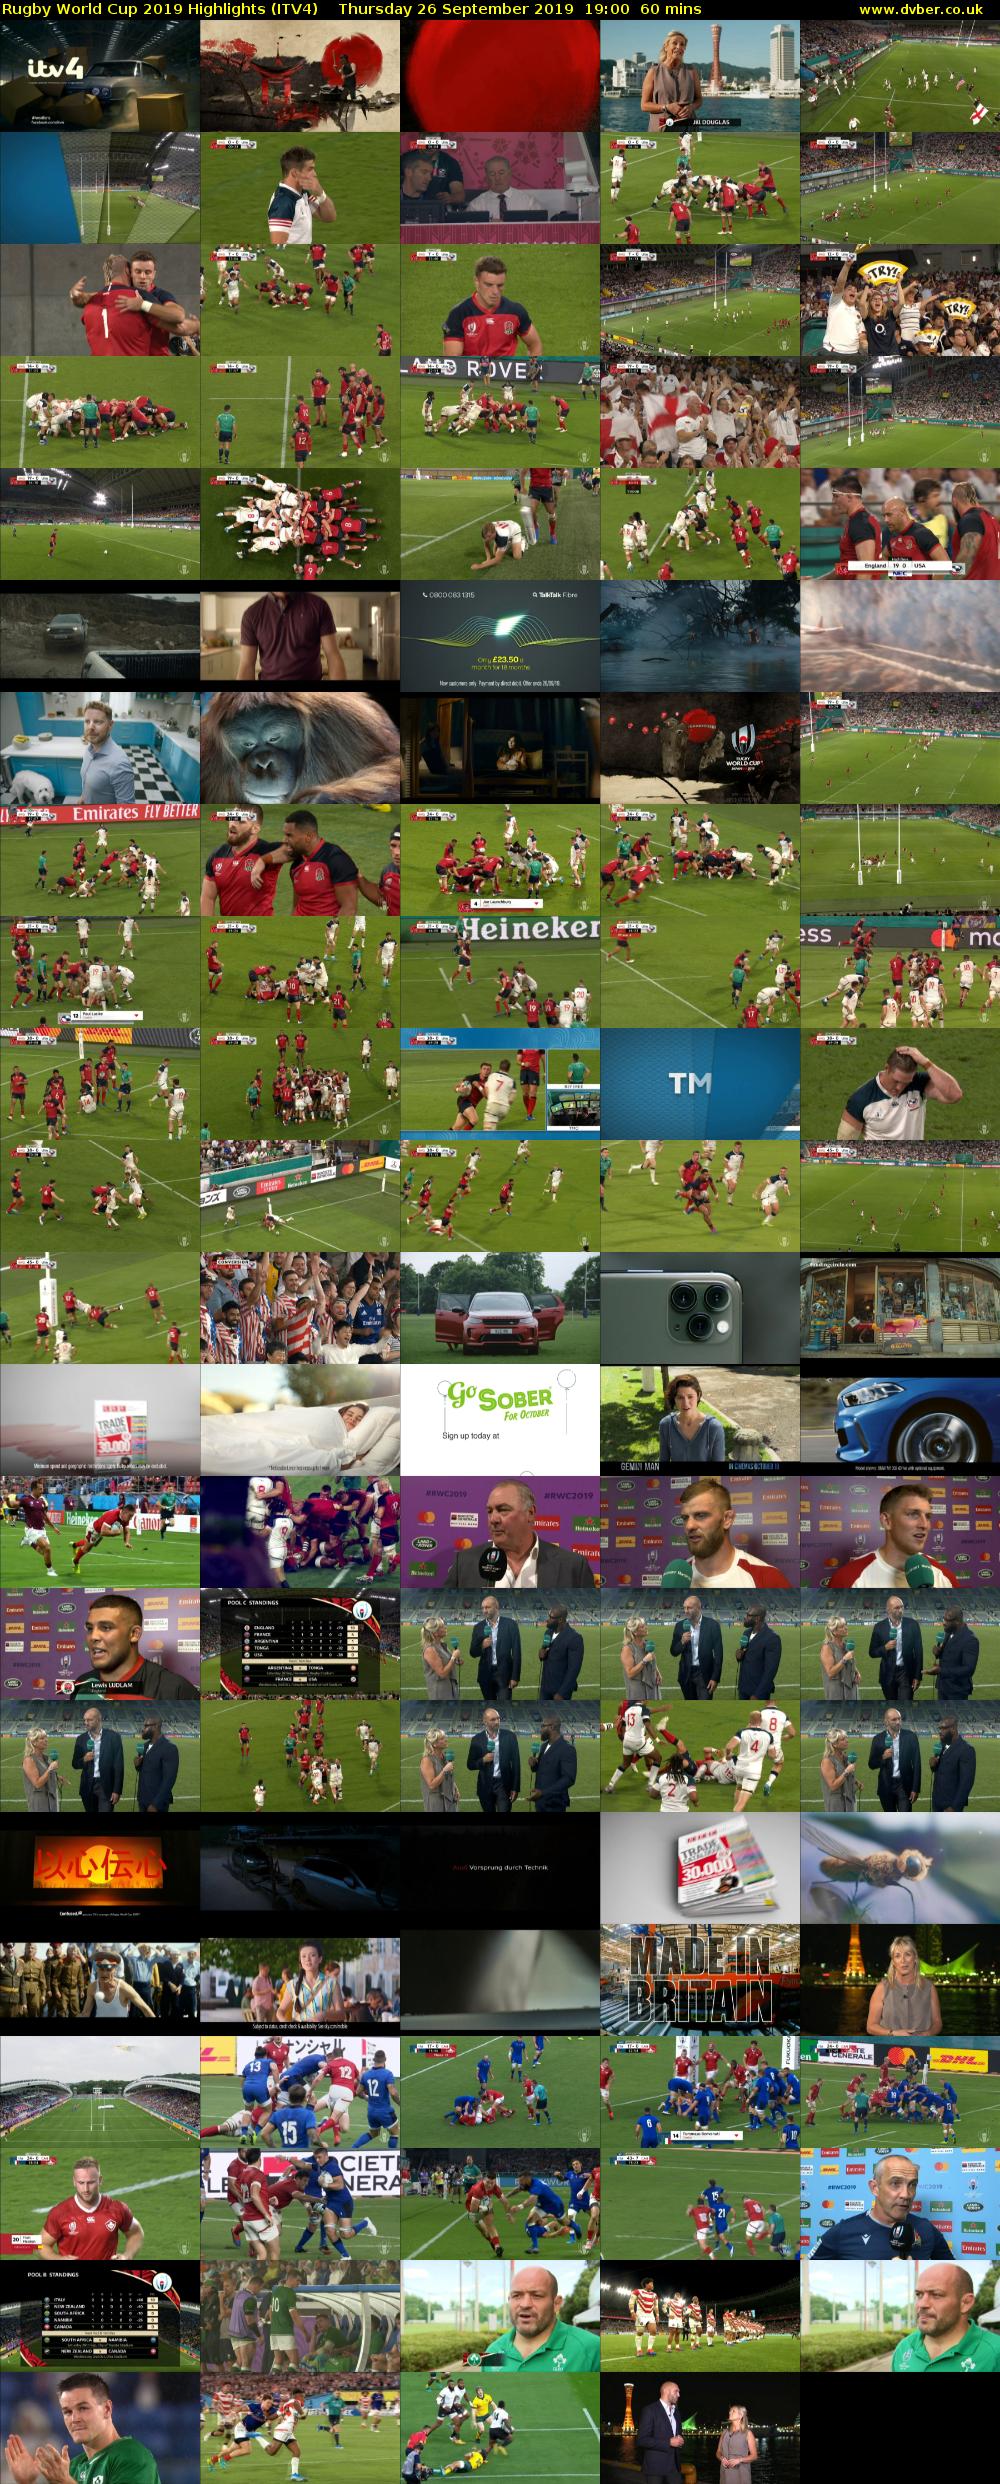 Rugby World Cup 2019 Highlights (ITV4) Thursday 26 September 2019 19:00 - 20:00